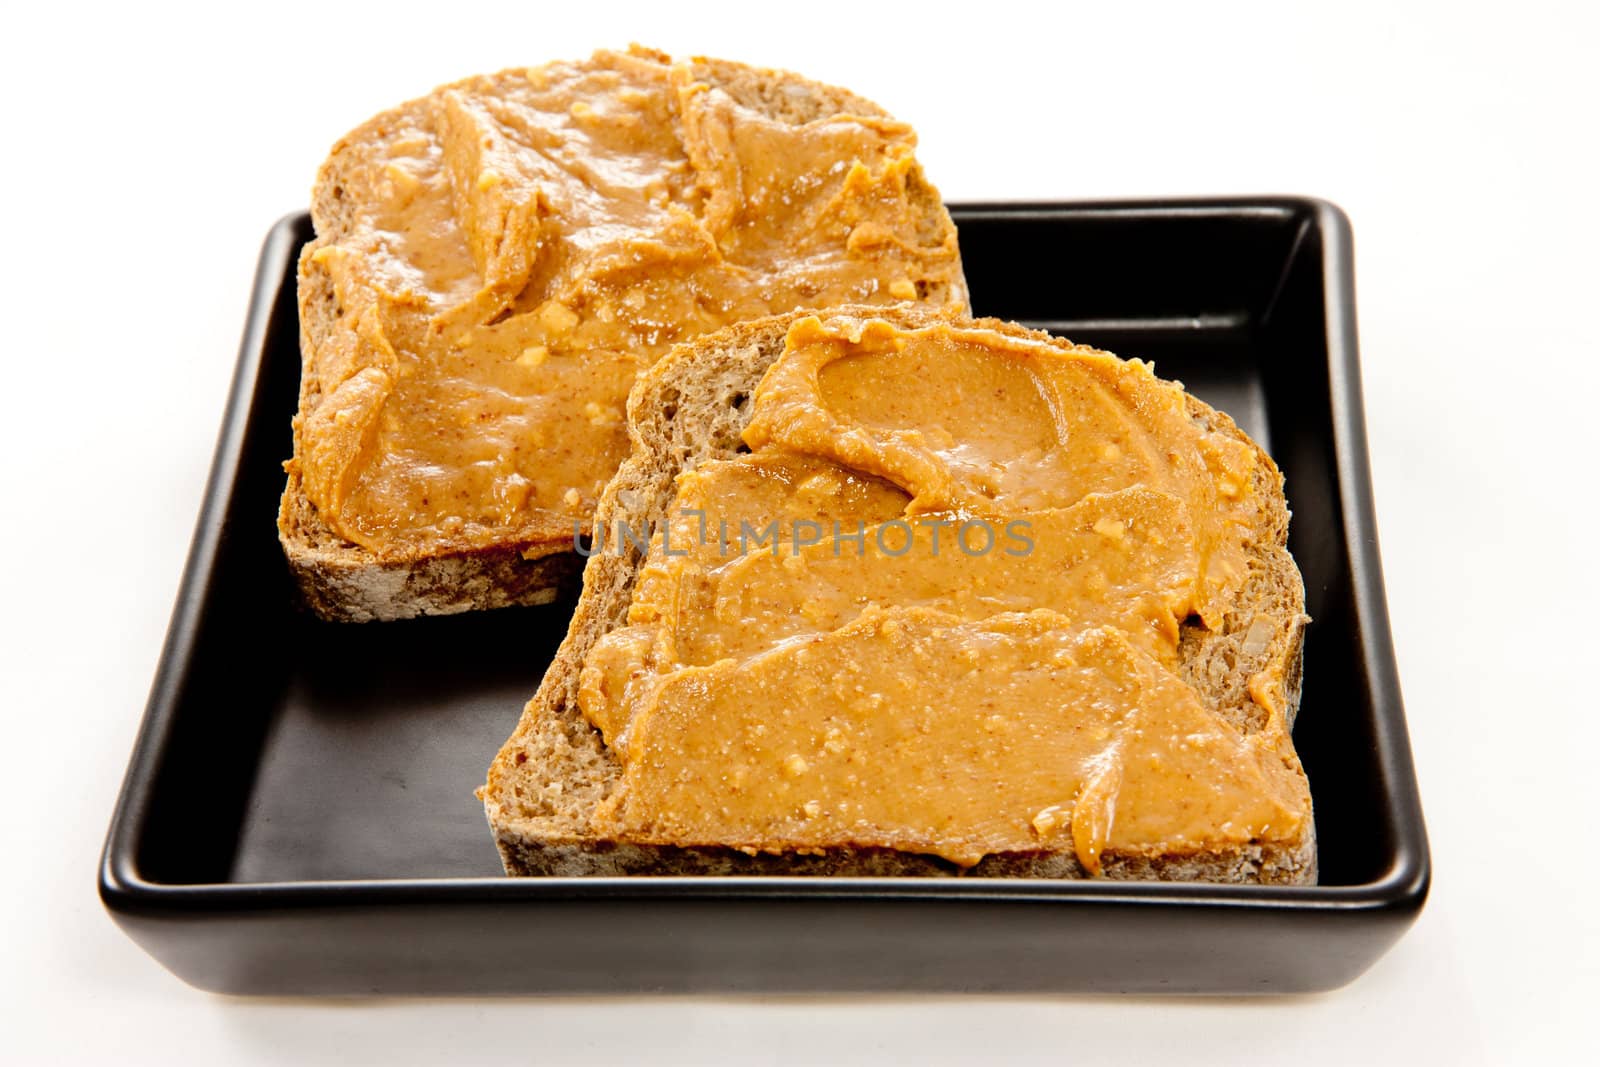 Slices of bread with peanut butter by Stootsy